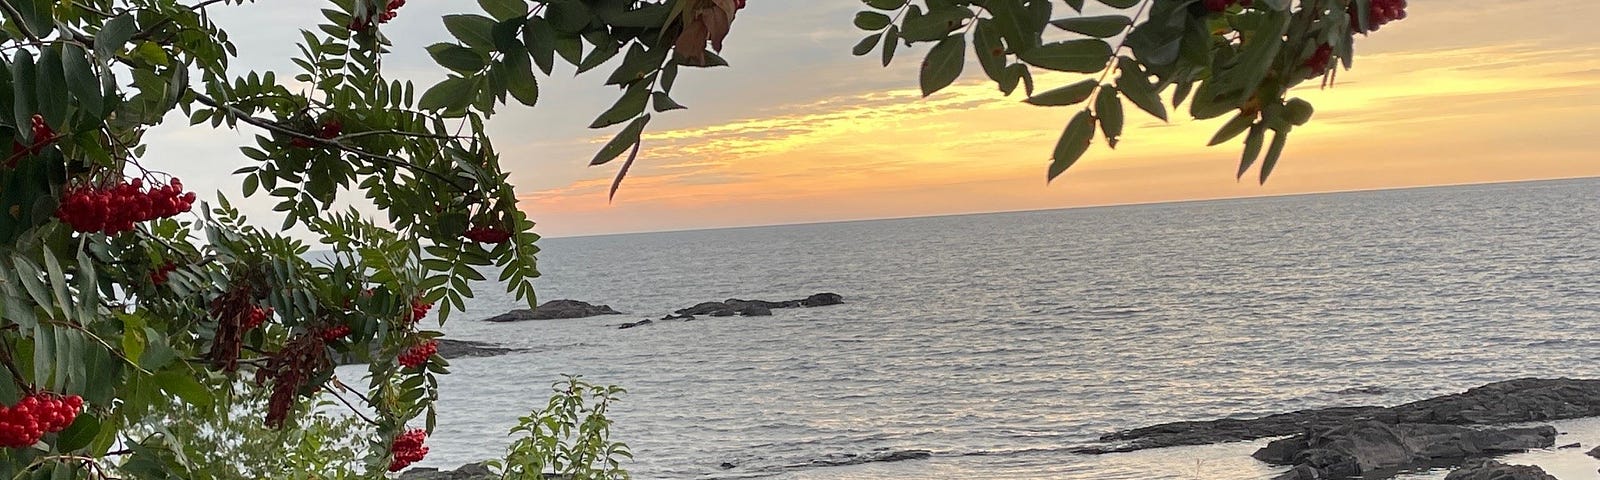 Orange and yellow sunset over Lake Superior, framed by green branches with bright red berries on the left and rocks and sand below.